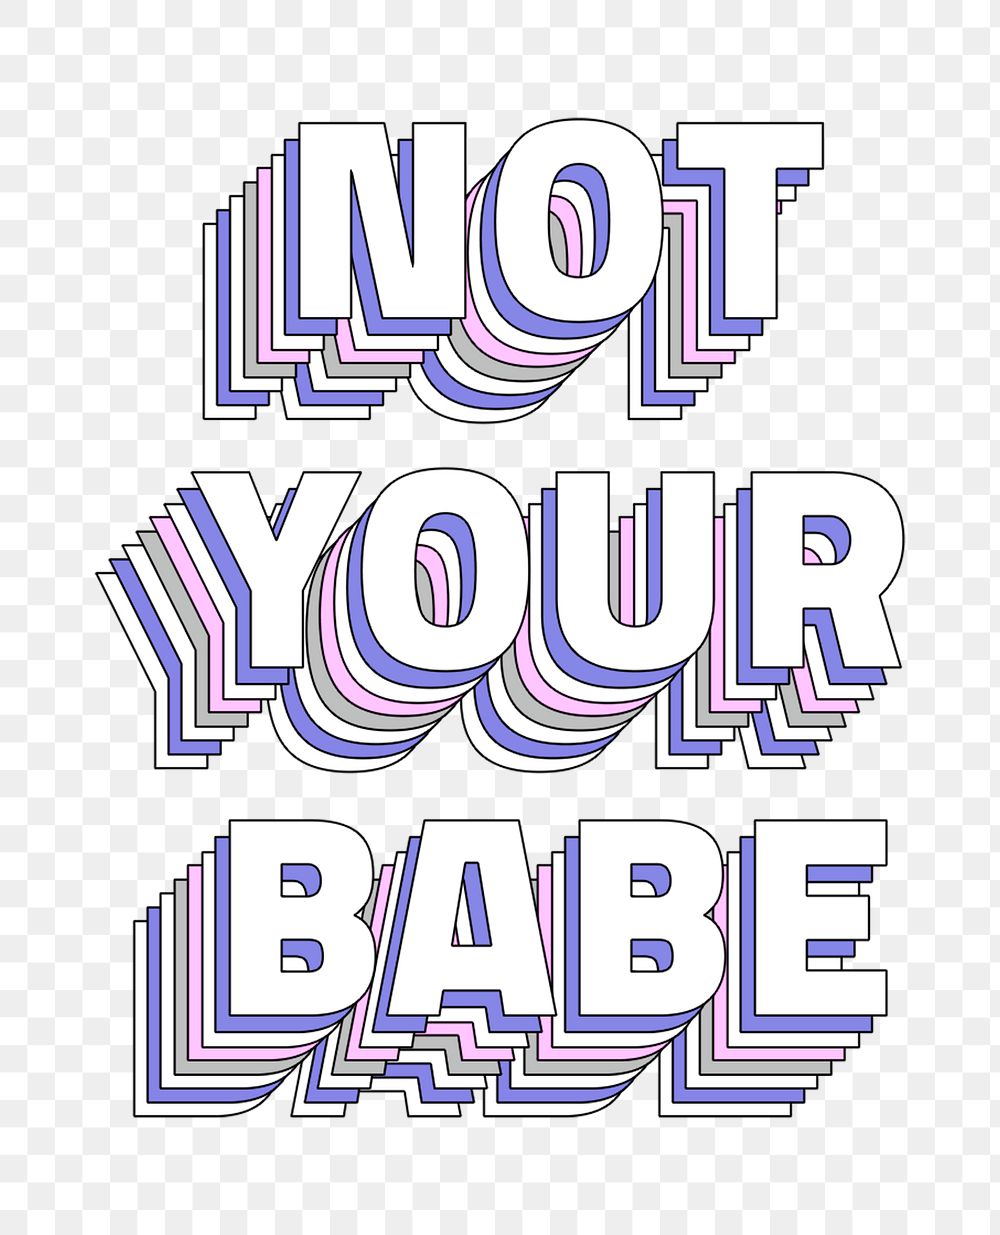 Not your babe layered png message typography retro word